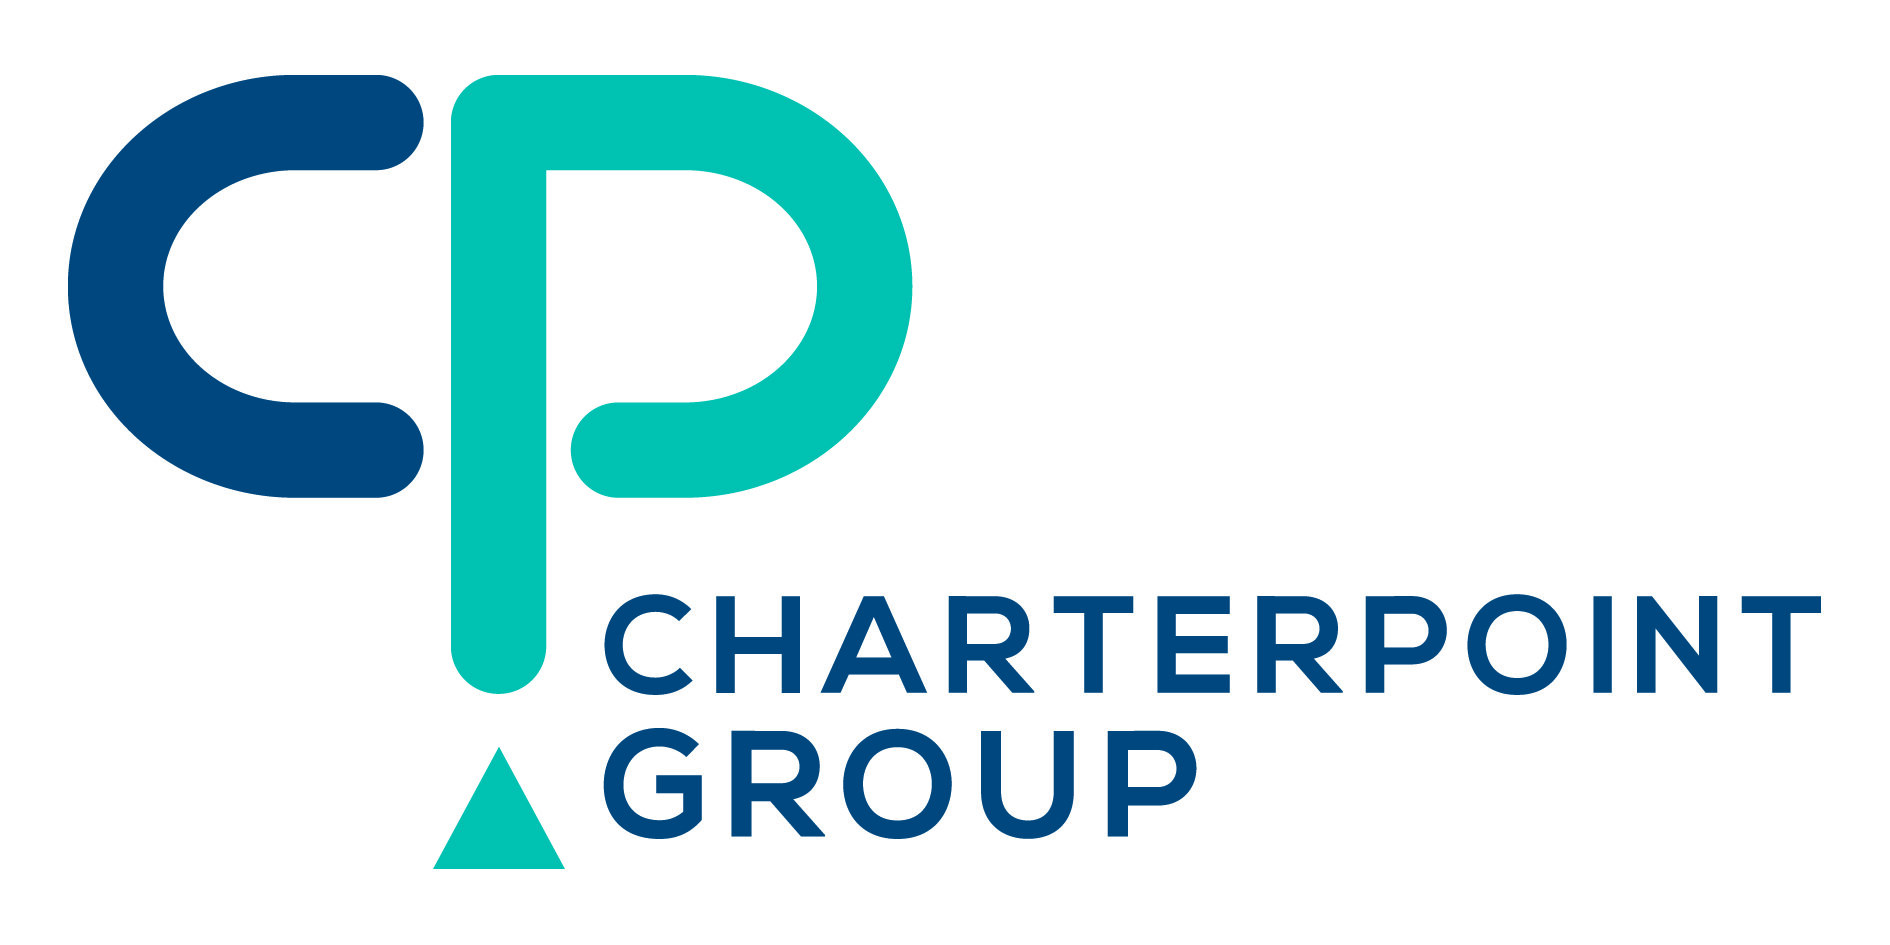 Charterpoint Group.jpg